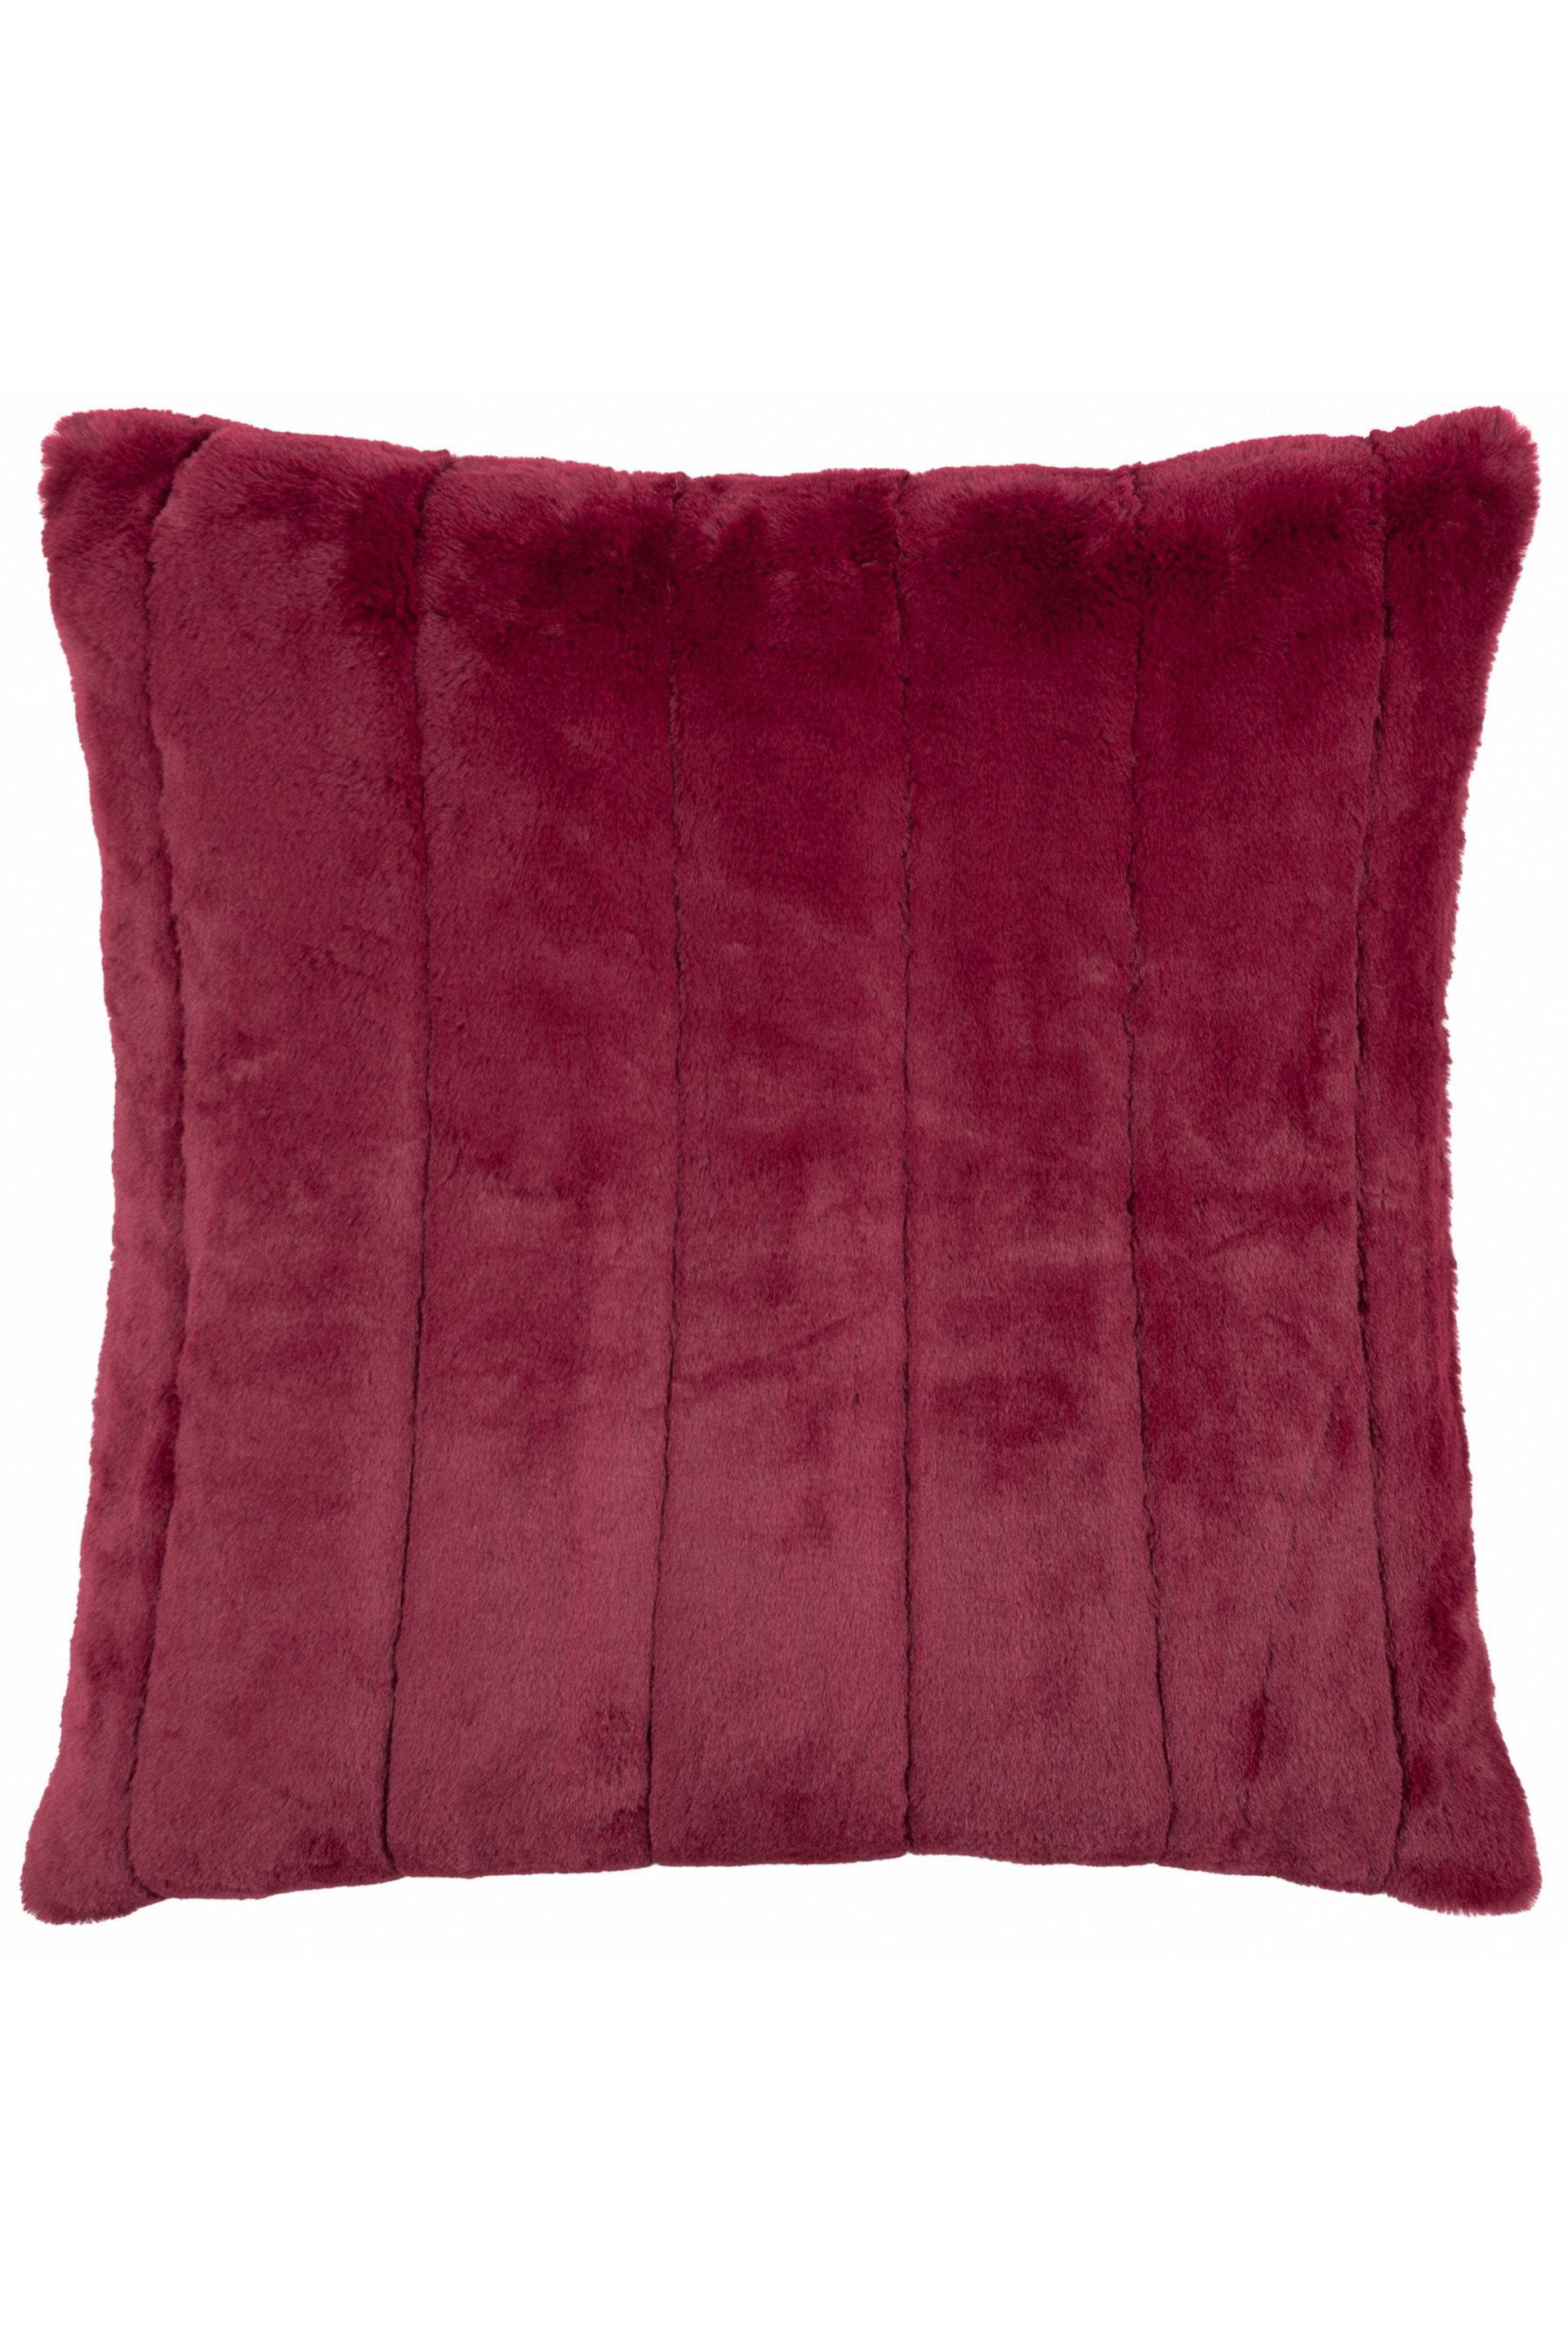 Riva Paoletti Red Empress Large Alpine Faux Fur Cushion - Image 1 of 6